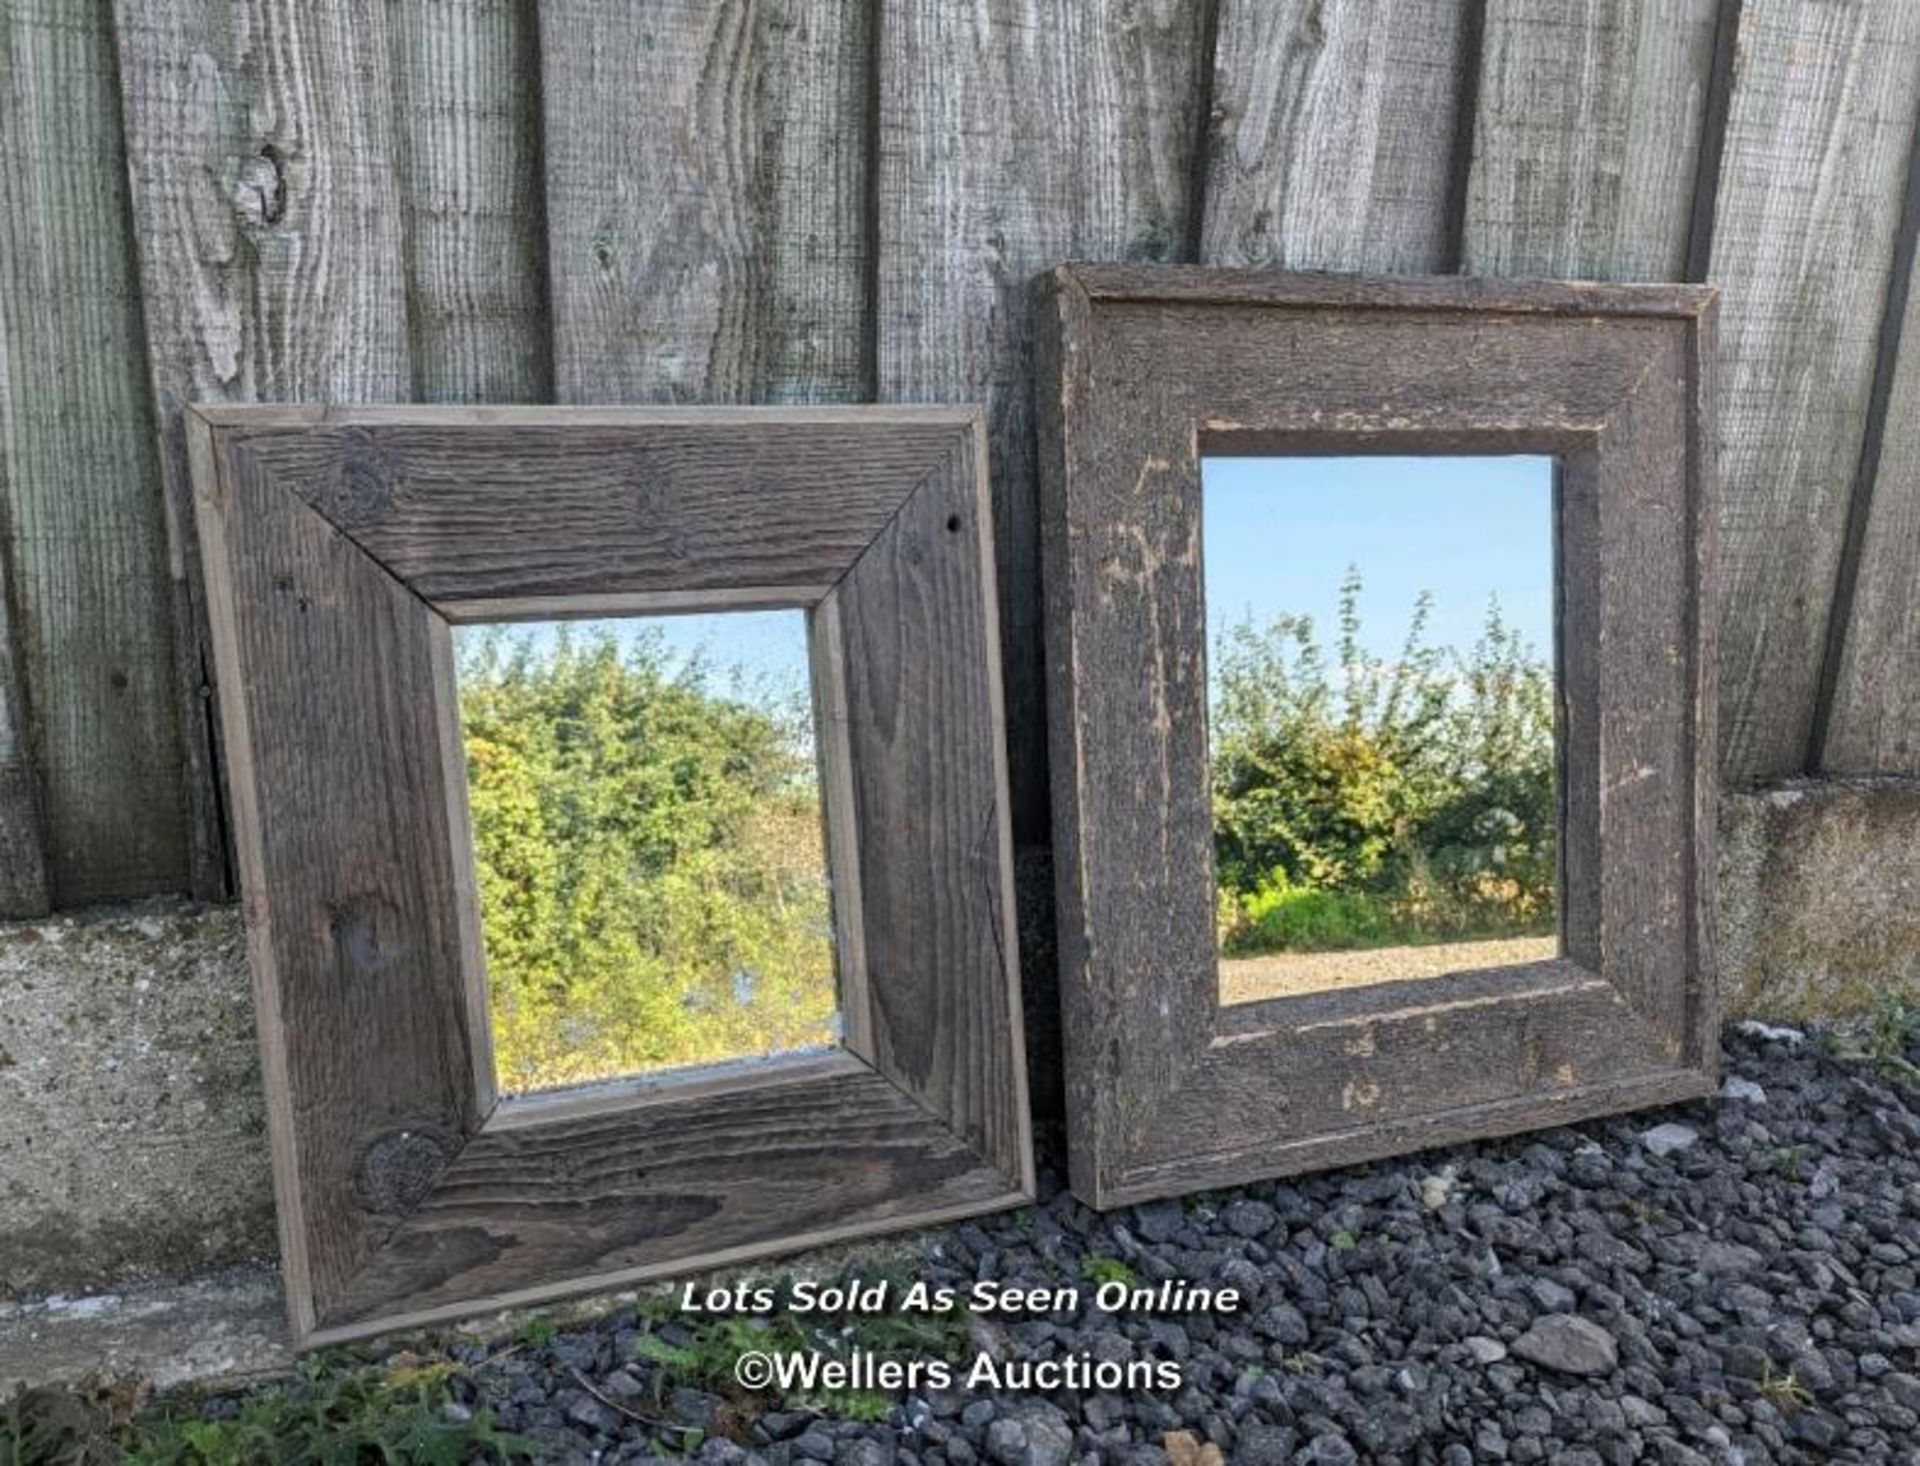 2 reclaimed and rustic pine mirrors with old mirror glass